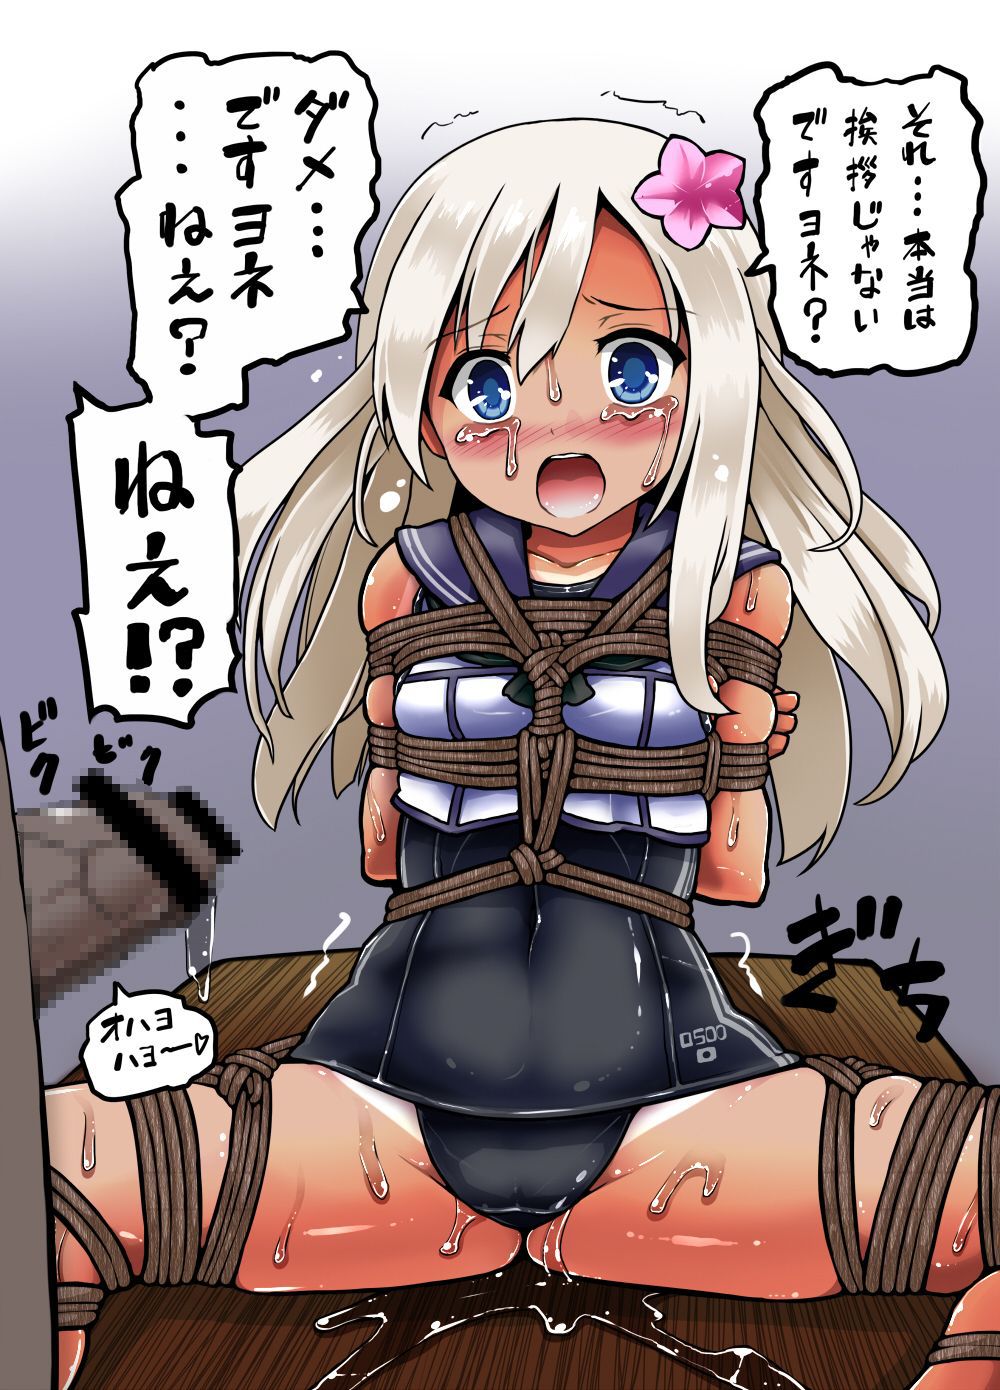 [the second] The SUQQU water sunburn daughter of warship this (fleet これくしょん), ロリエロ image summary of 呂 500, also known as the low No. 13 [20 pieces]! 7